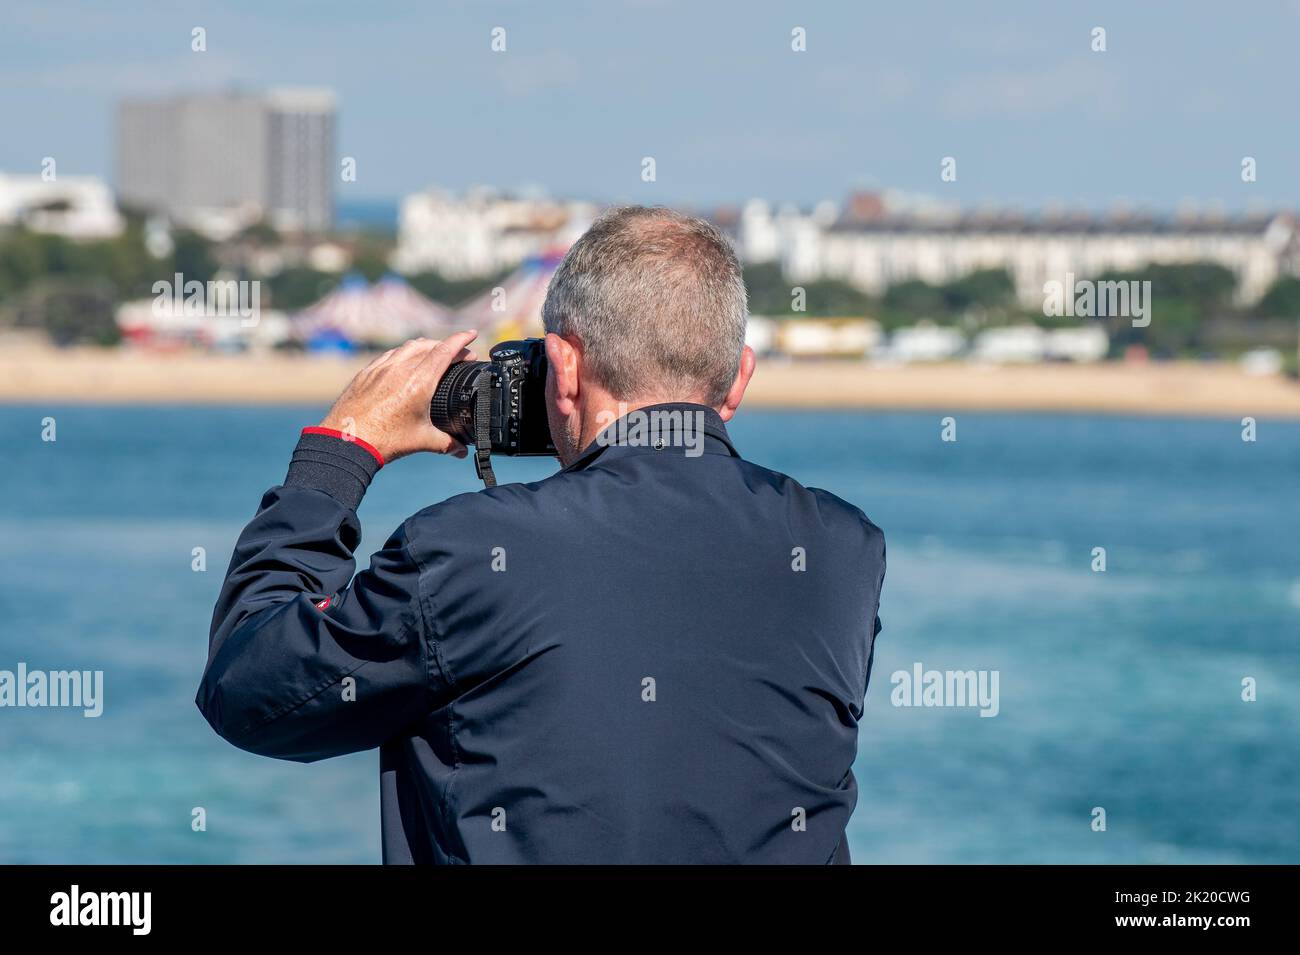 older man taking a photograph using a DSLR camera, photographer using a large camera to take a picture, holiday snaps, travel photography, retirement. Stock Photo